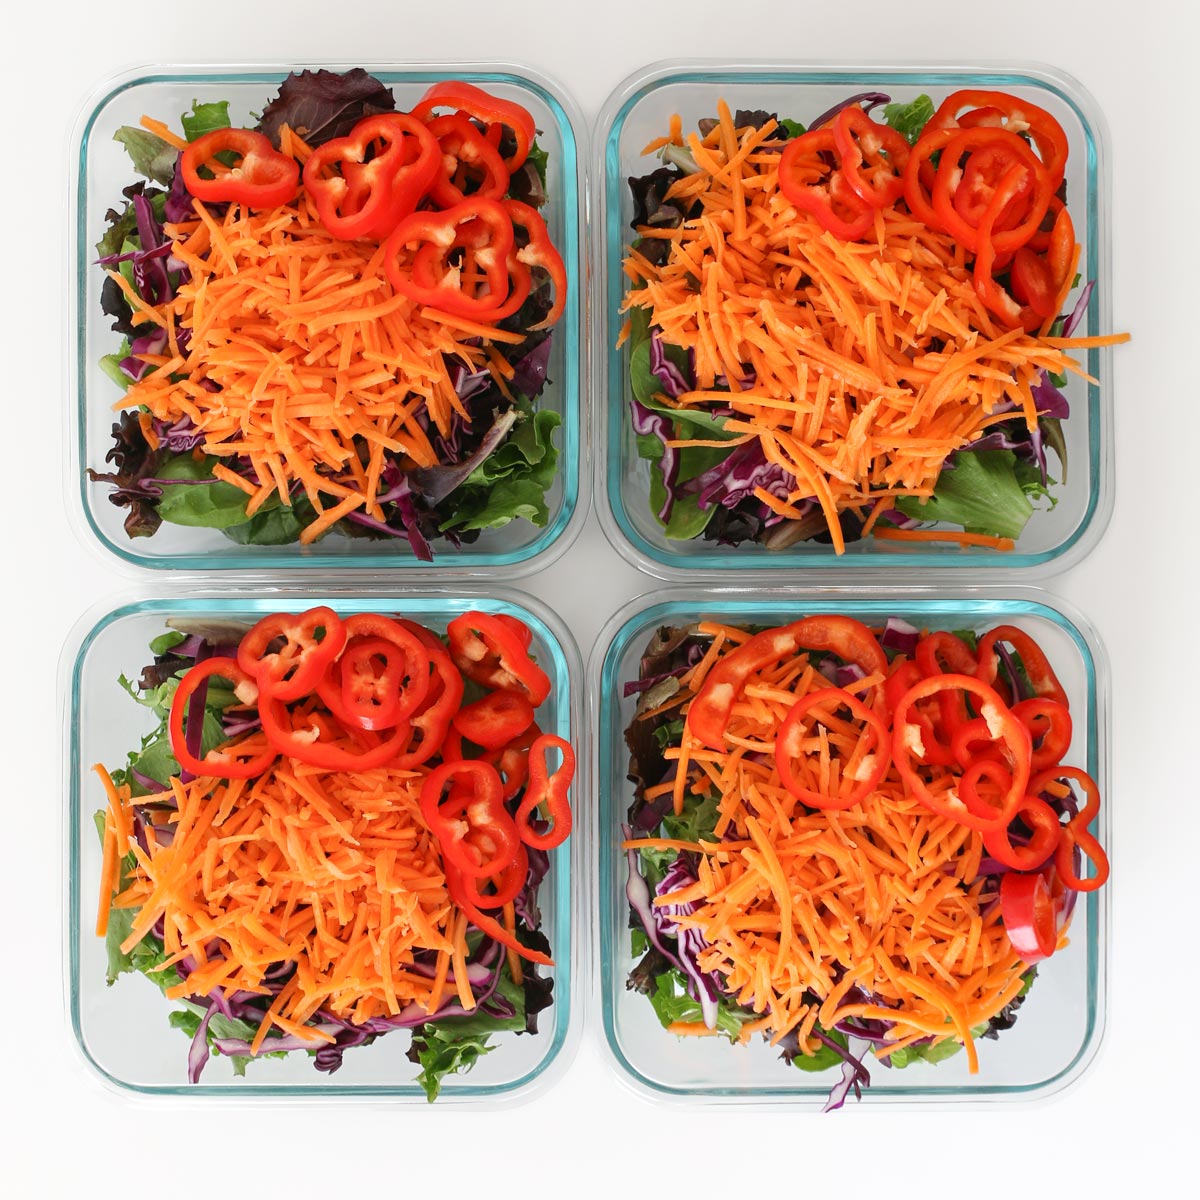 19 Best Salad Containers Of 2023 For Healthy Food